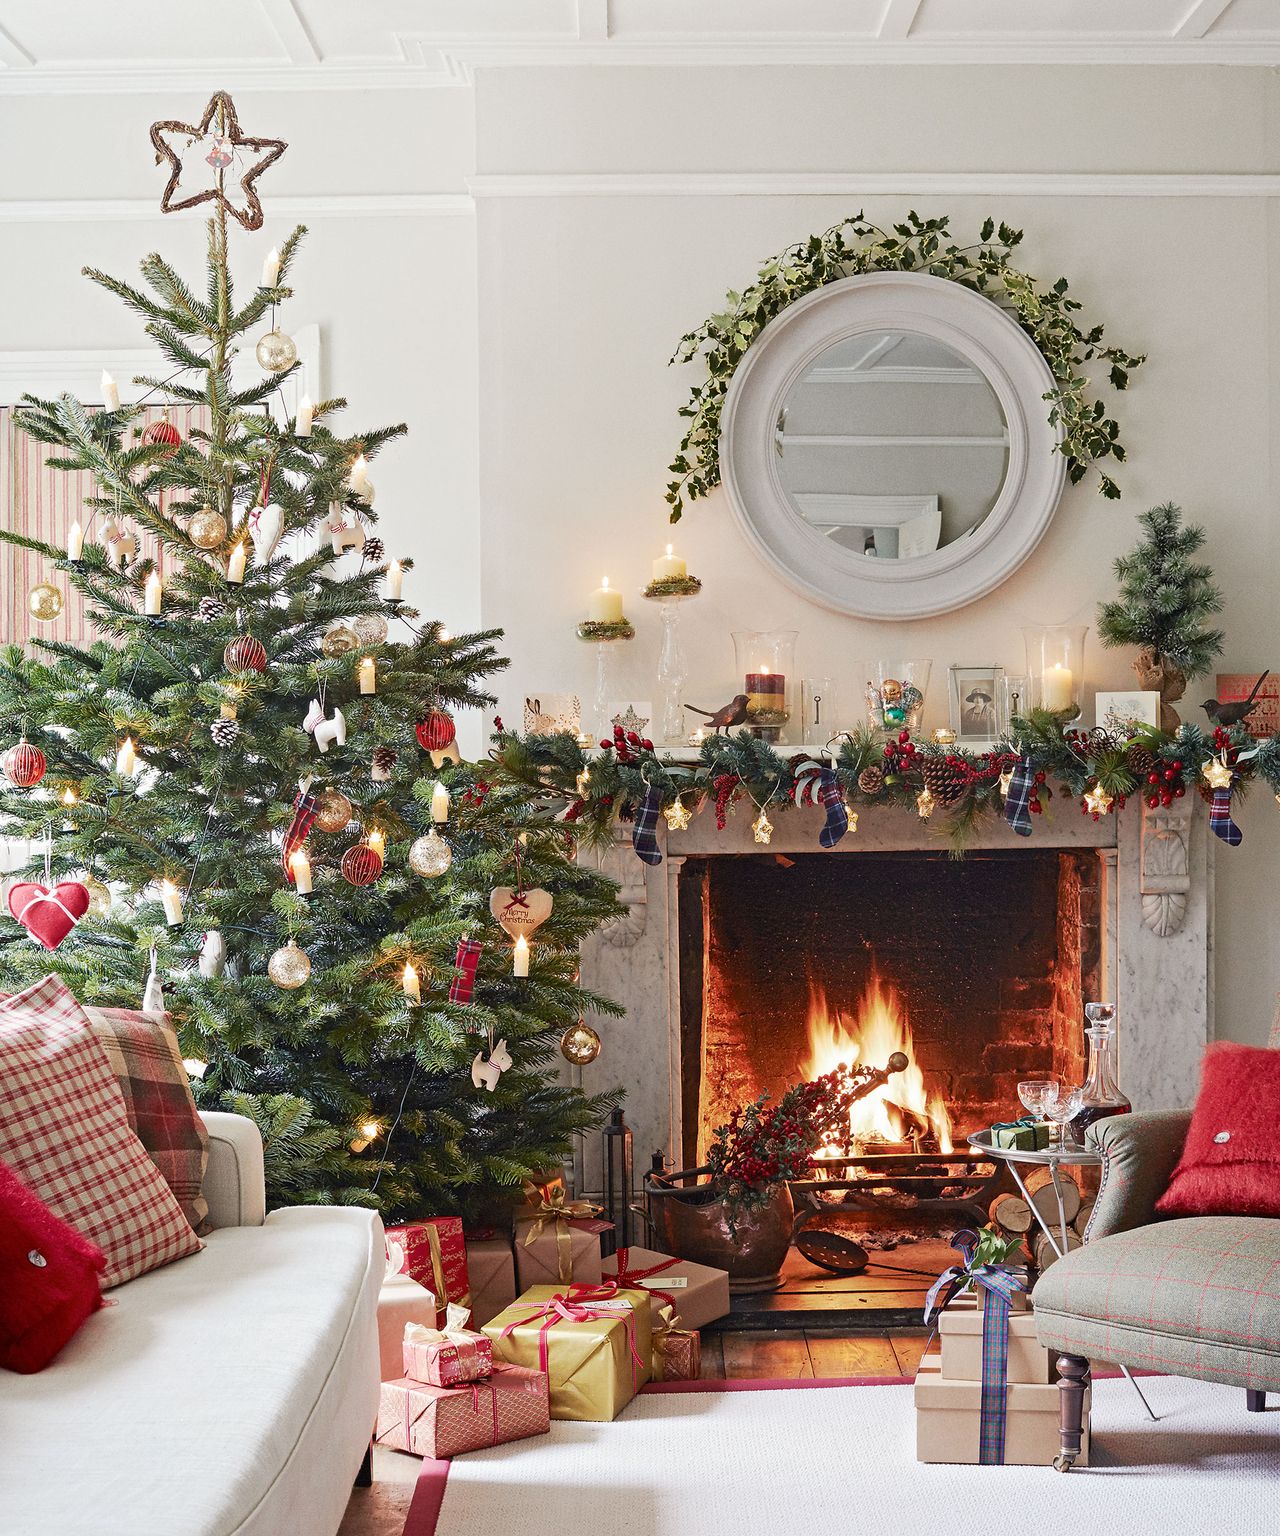 Christmas tree trends H&G's pick of the best new Christmas tree